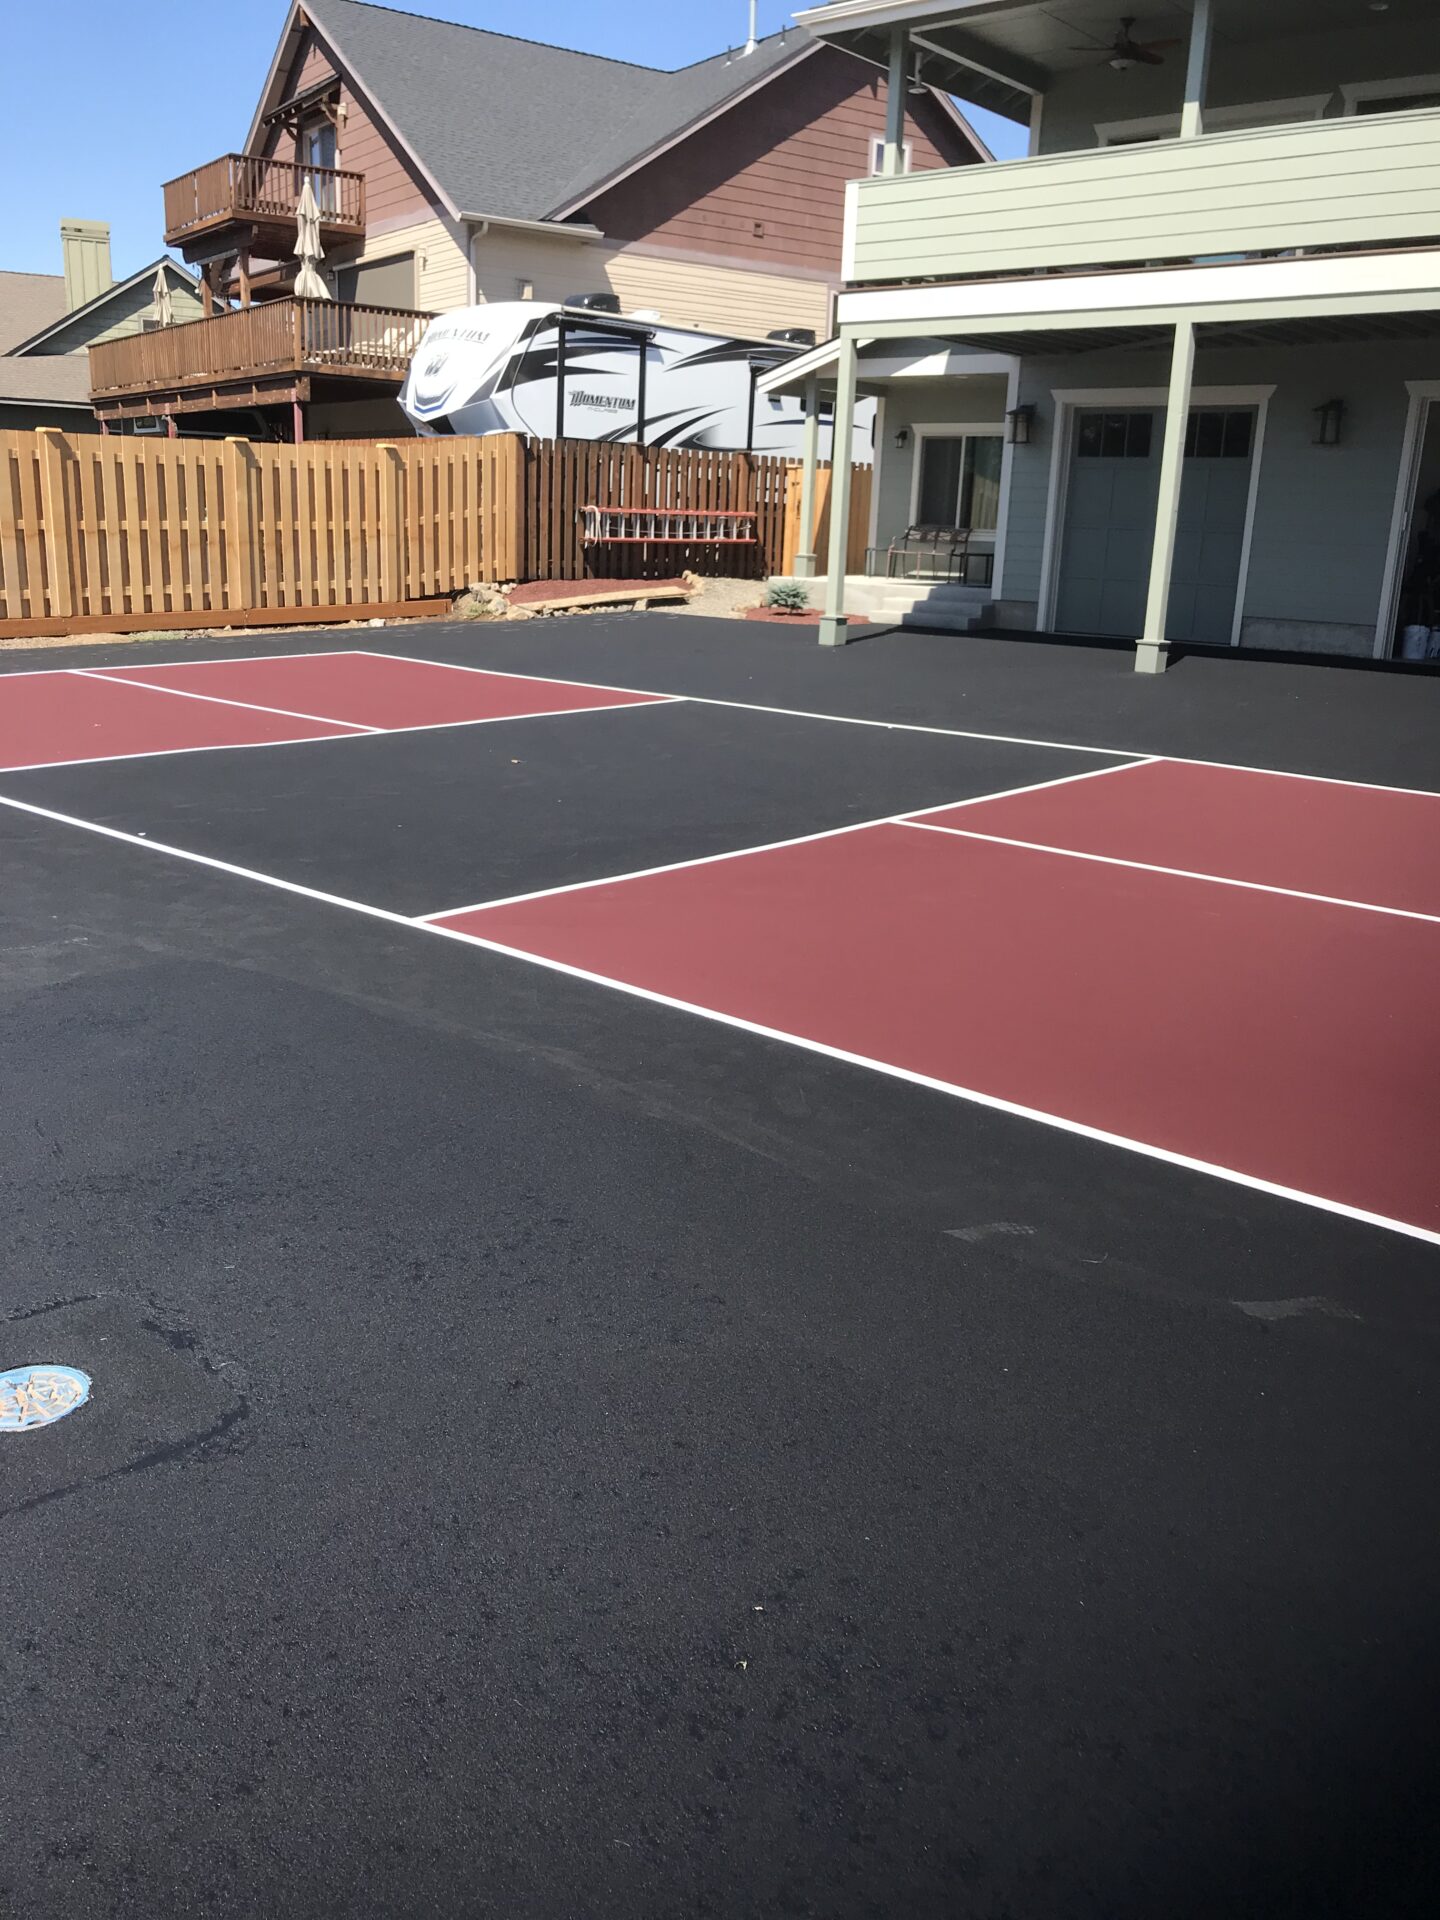 A tennis court with two different colors of asphalt.